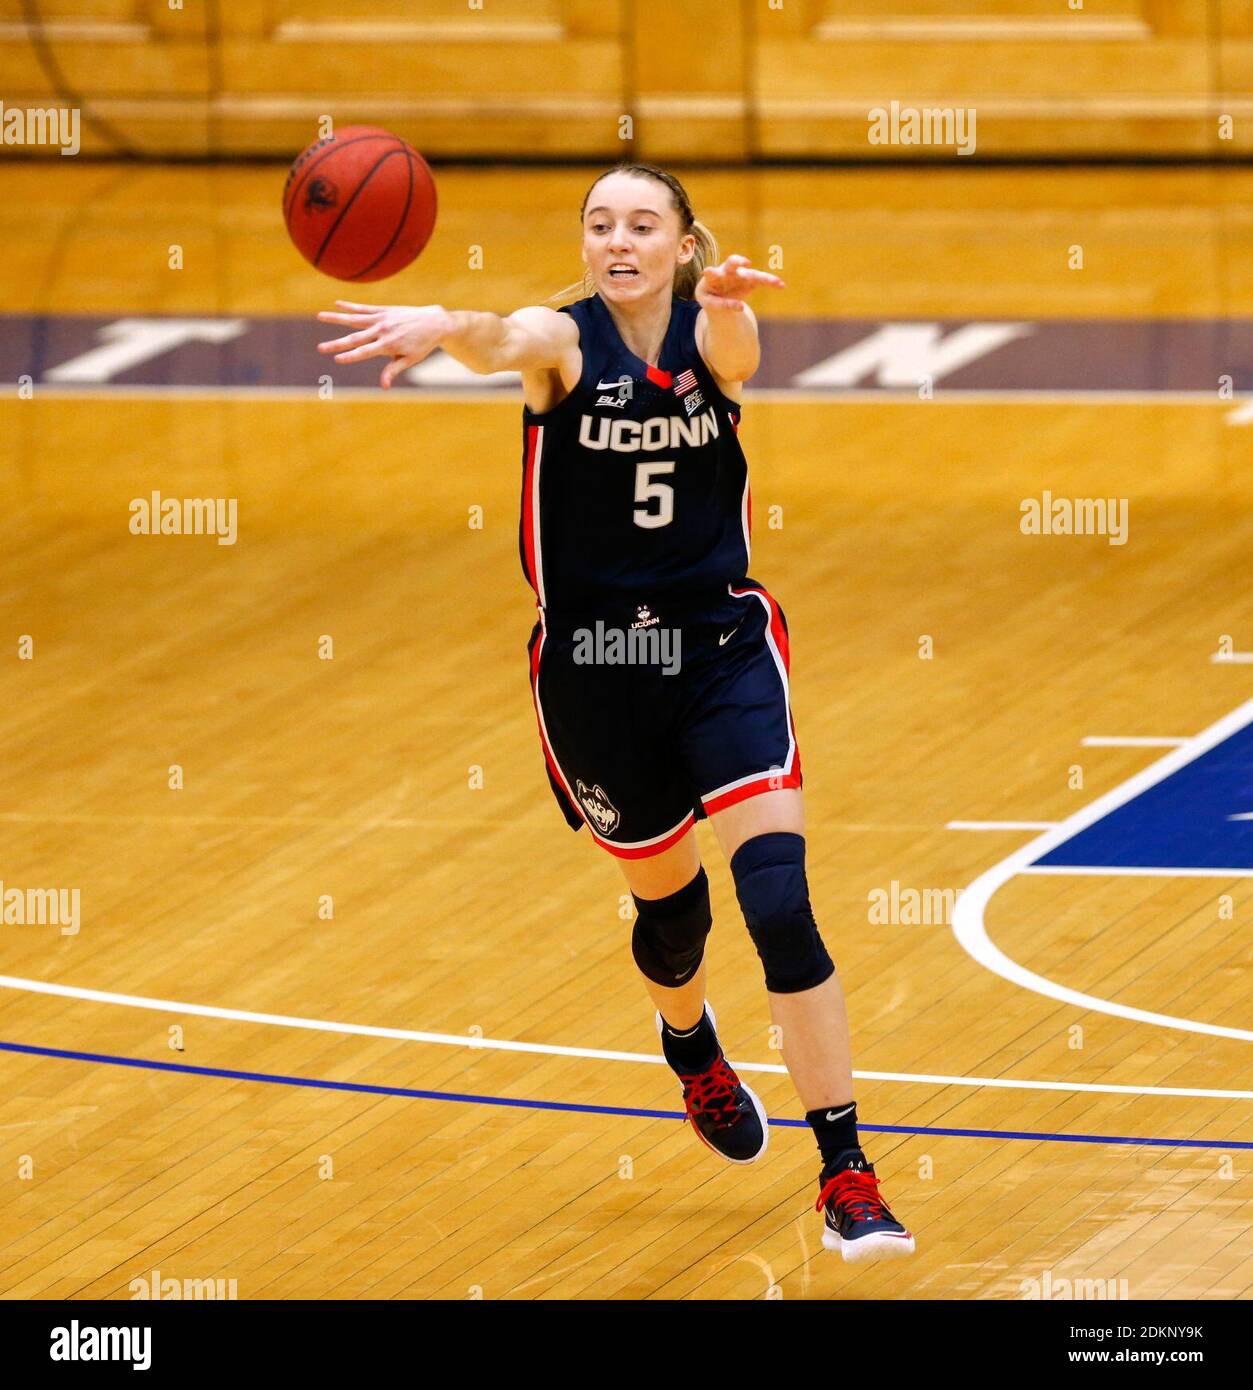 South Orange, New Jersey, USA. 16th Dec, 2020. UConn Huskies guard Paige Bueckers (5) makes a pass up court in the second half at Walsh Gymnasium in South Orange, New Jersey. UConn defeated Seton Hall 92-65. Duncan Williams/CSM/Alamy Live News Stock Photo